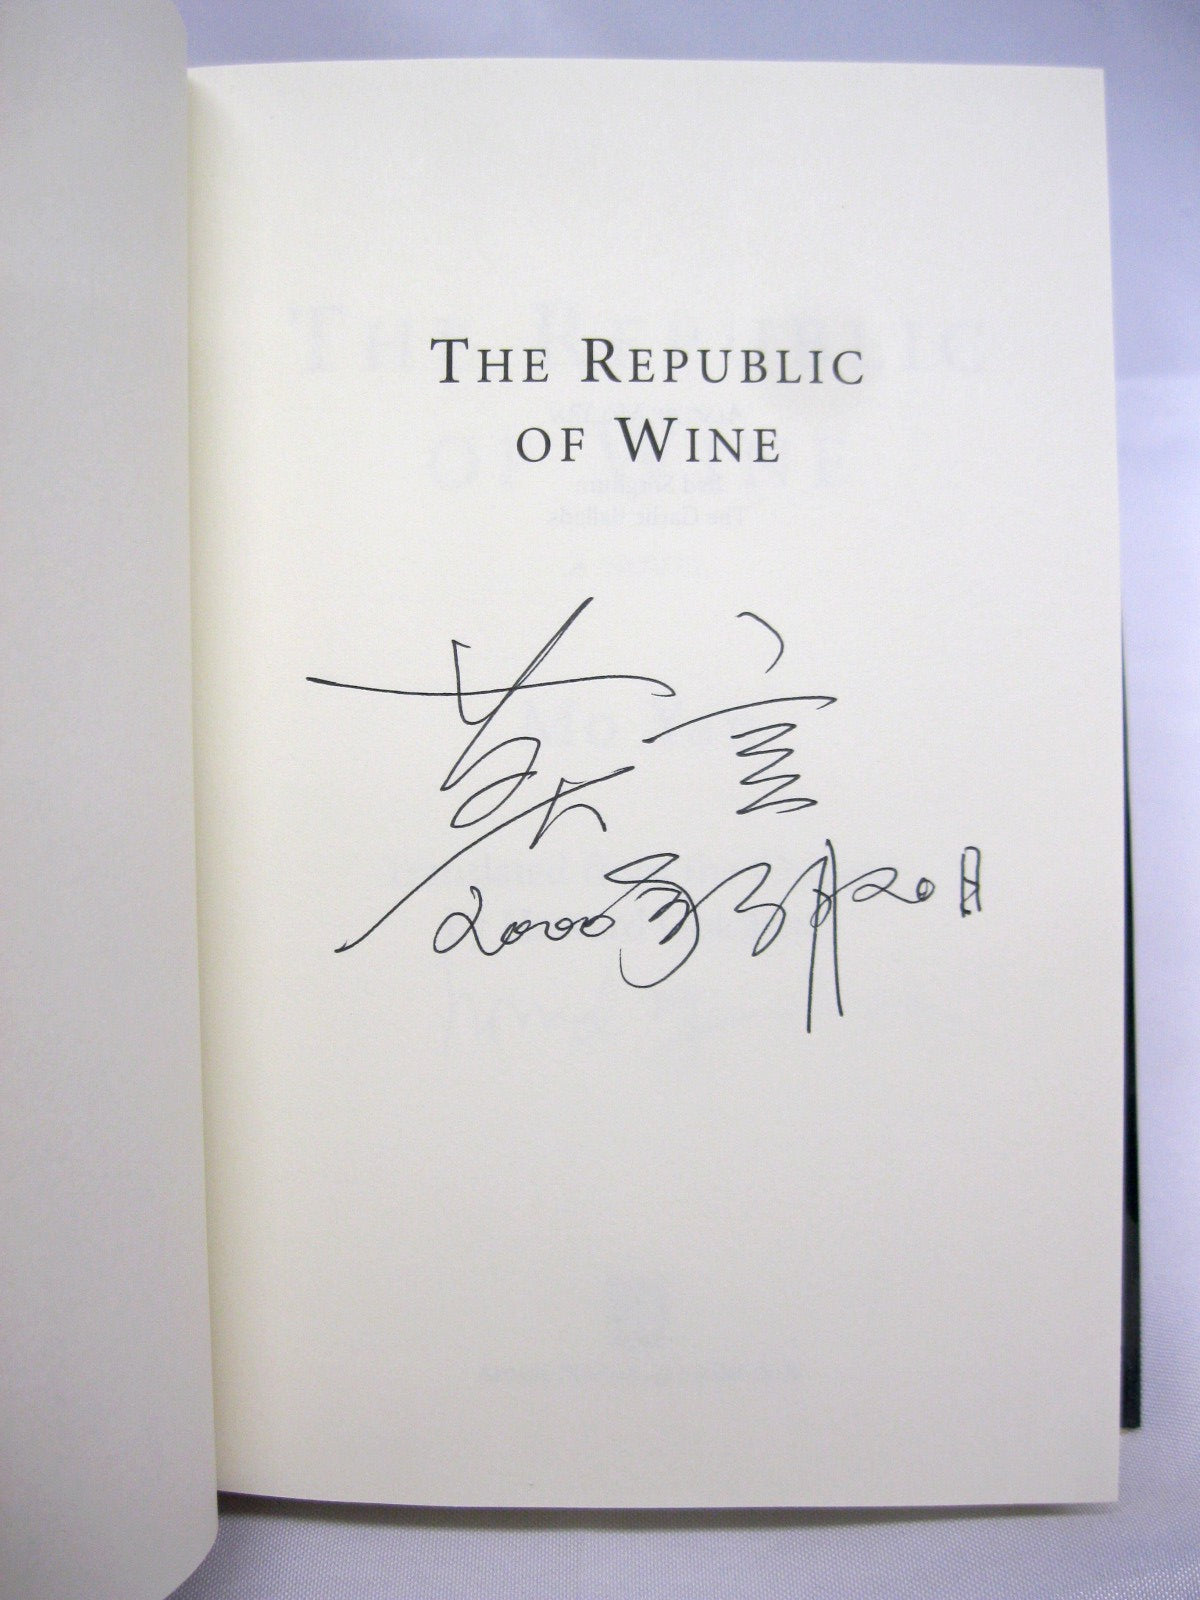 The Republic of Wine by Mo Yan